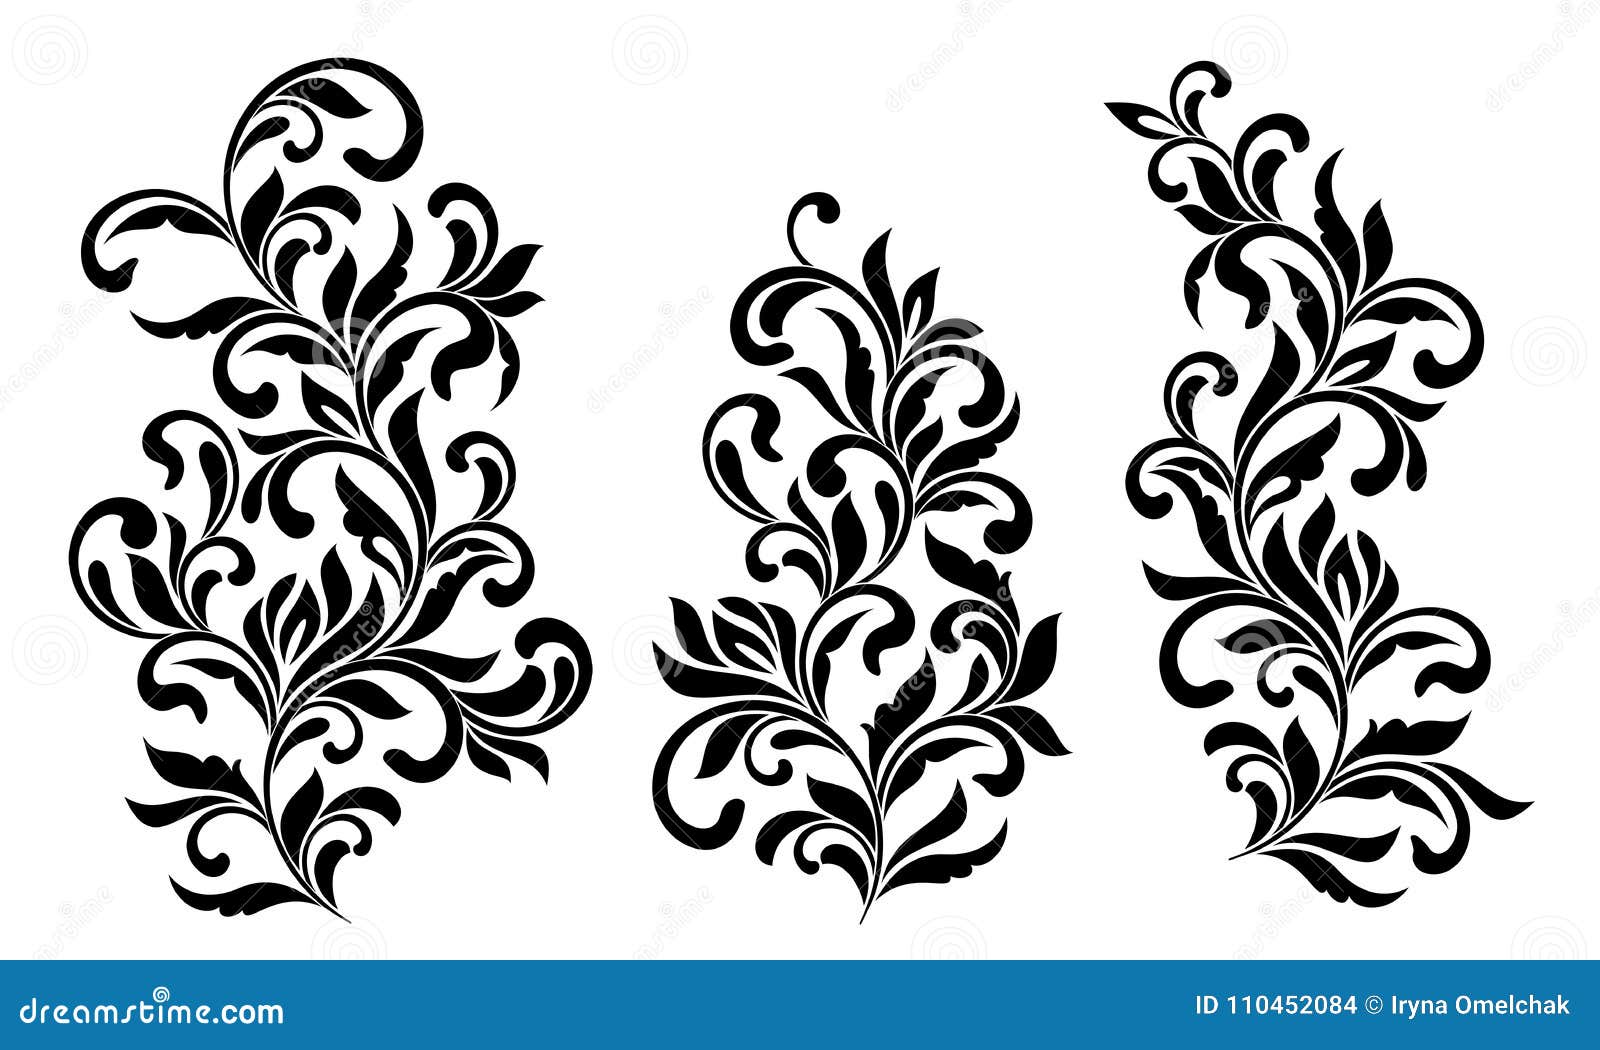 decorative floral s with swirls and leaves  on white background. ideal for stencil.